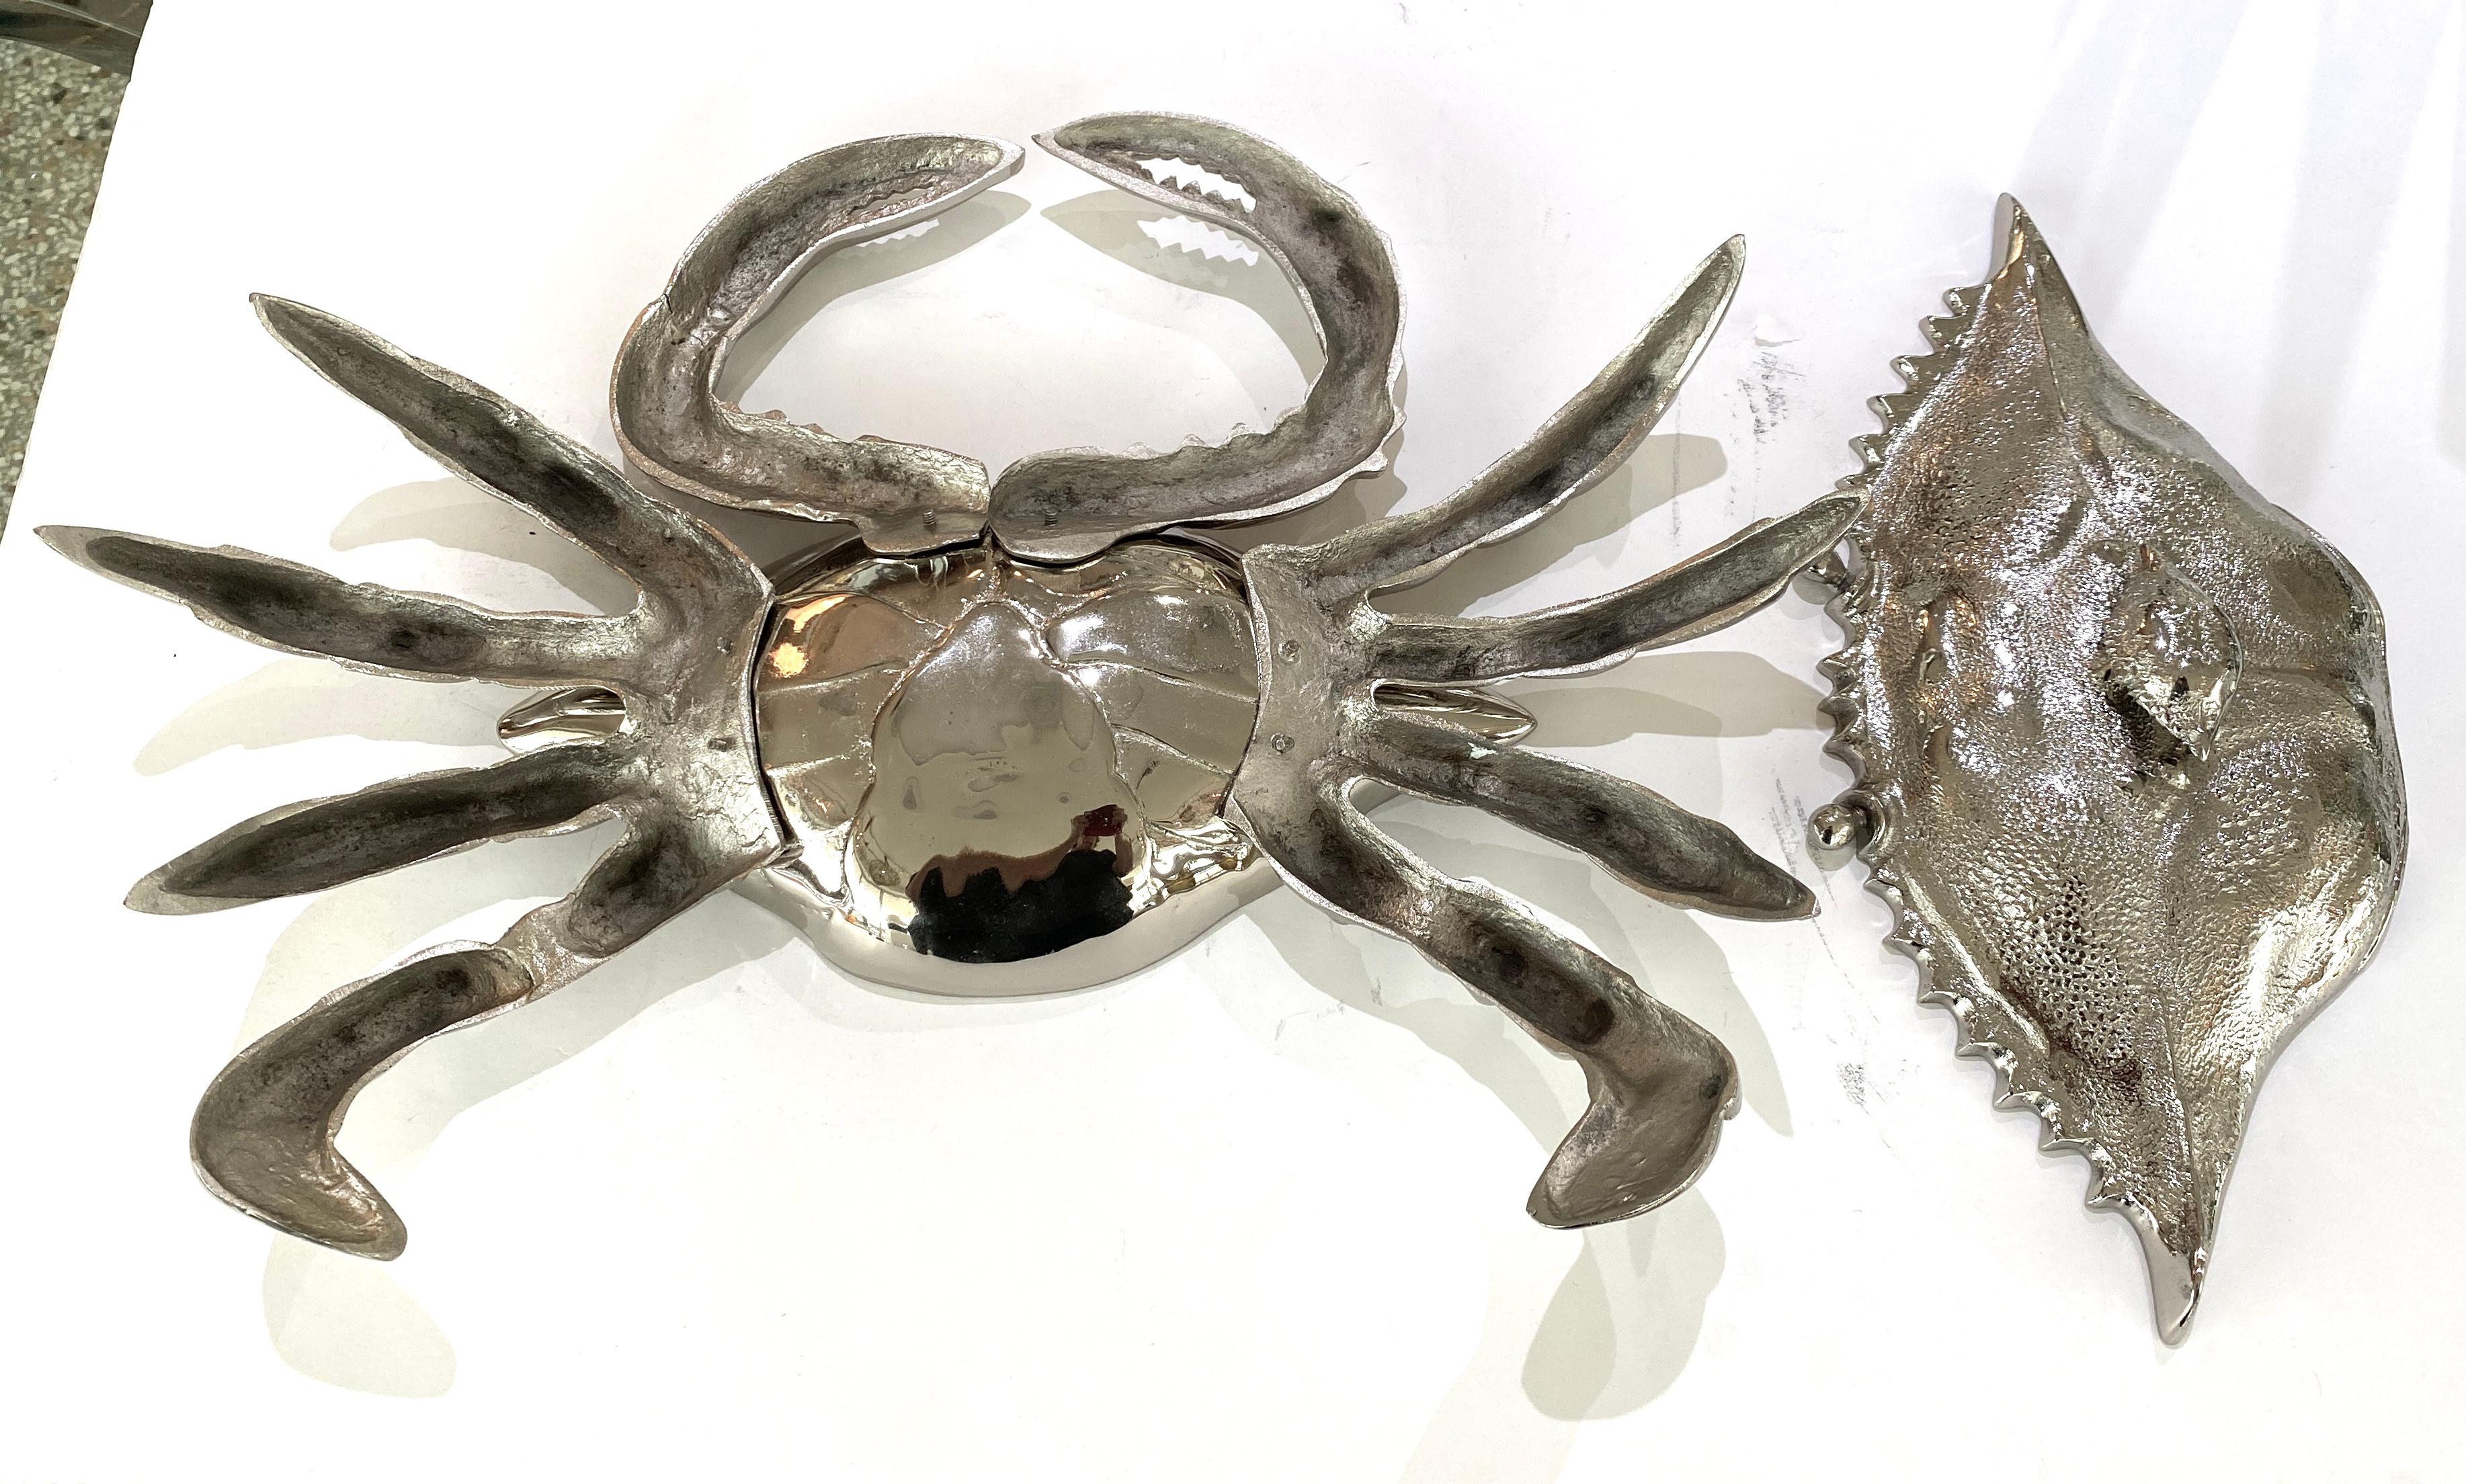 Contemporary Nickel Plated Crab Form Figure by Angel & Zevallos